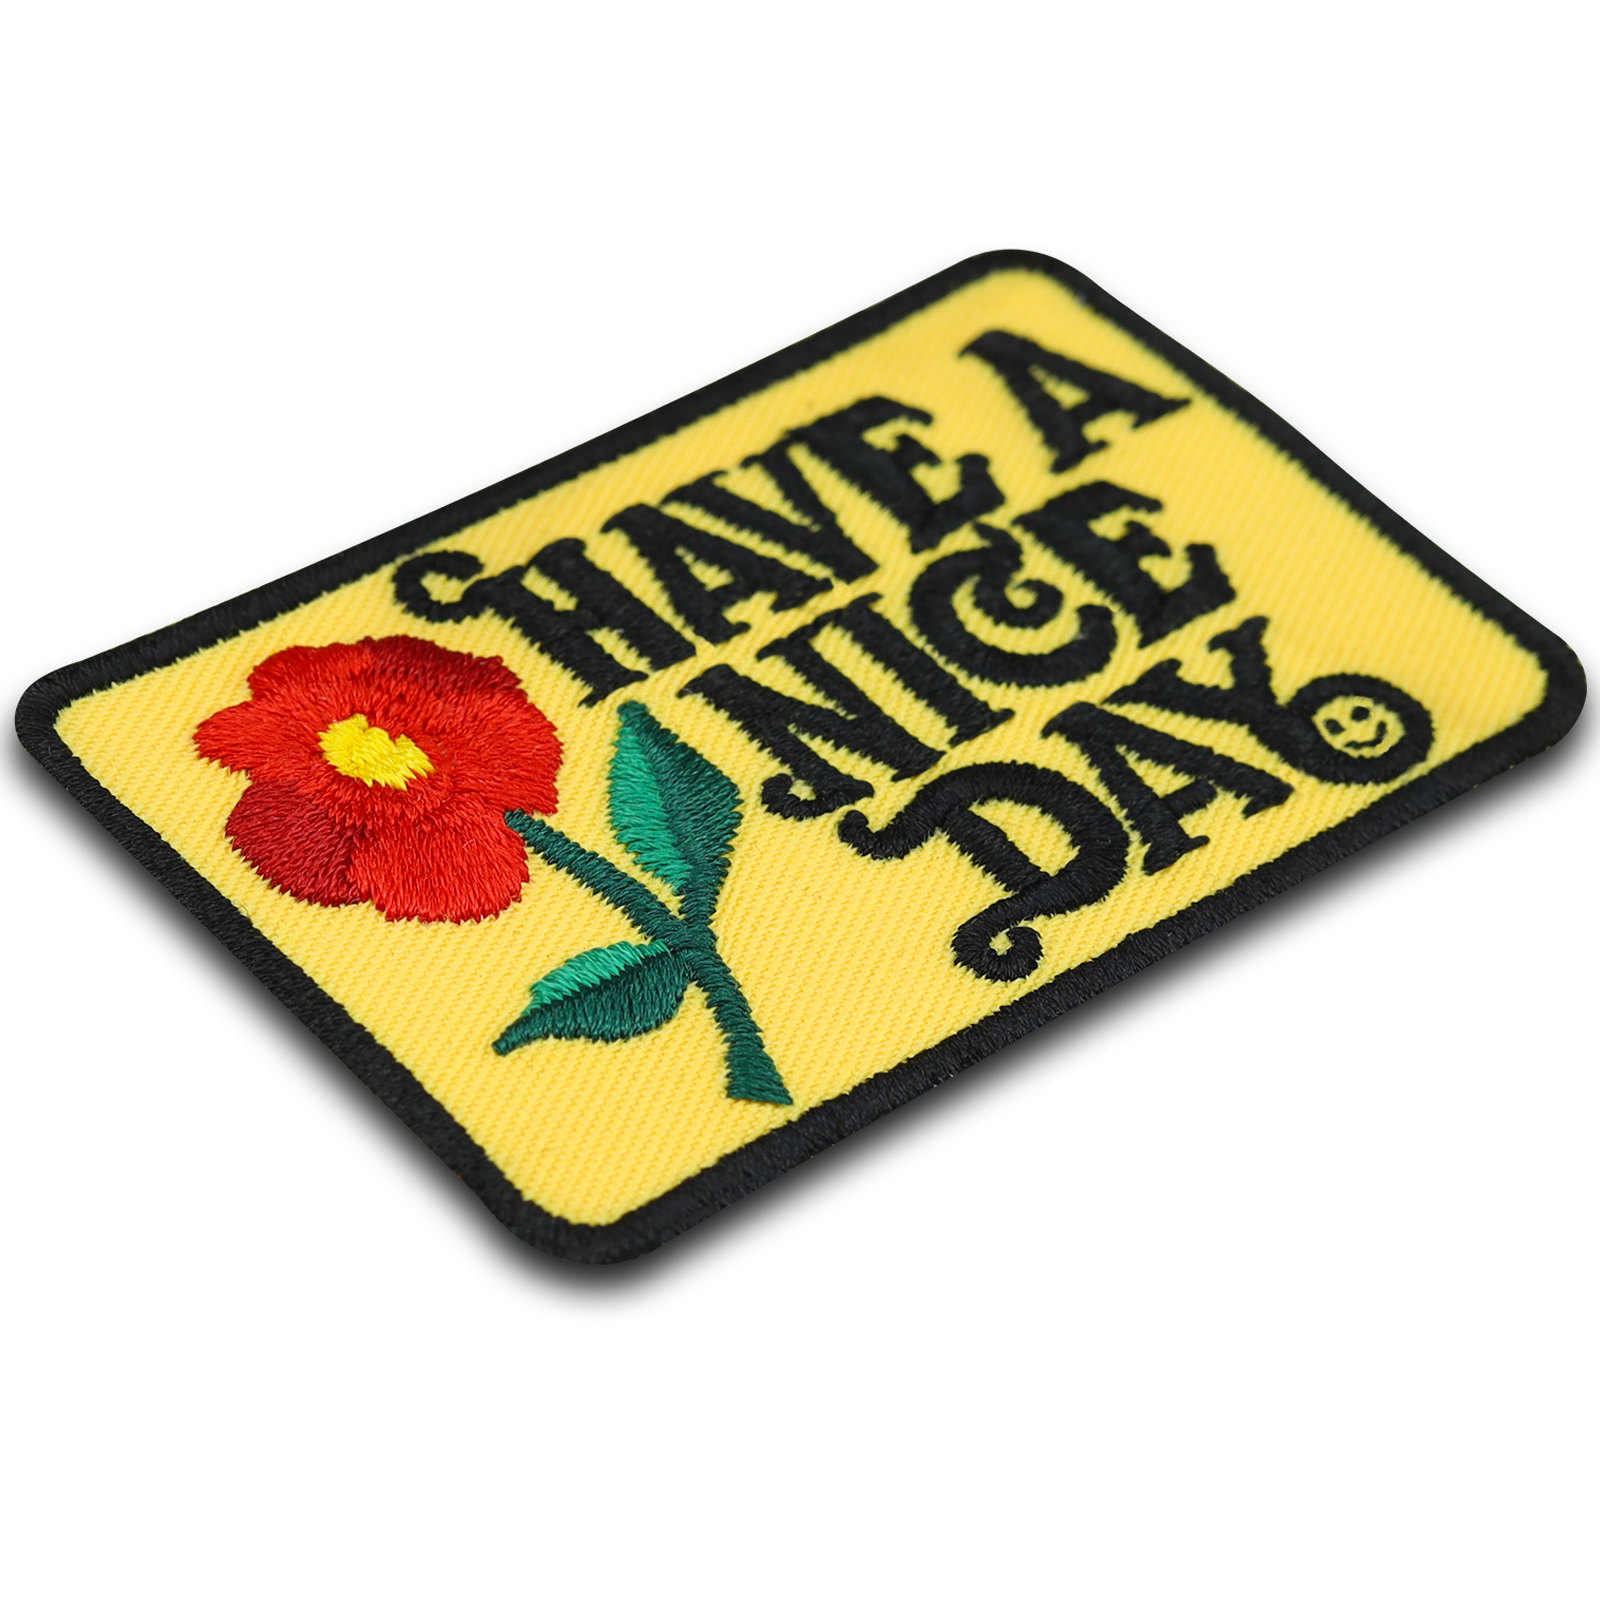 Have a nice day - Patch